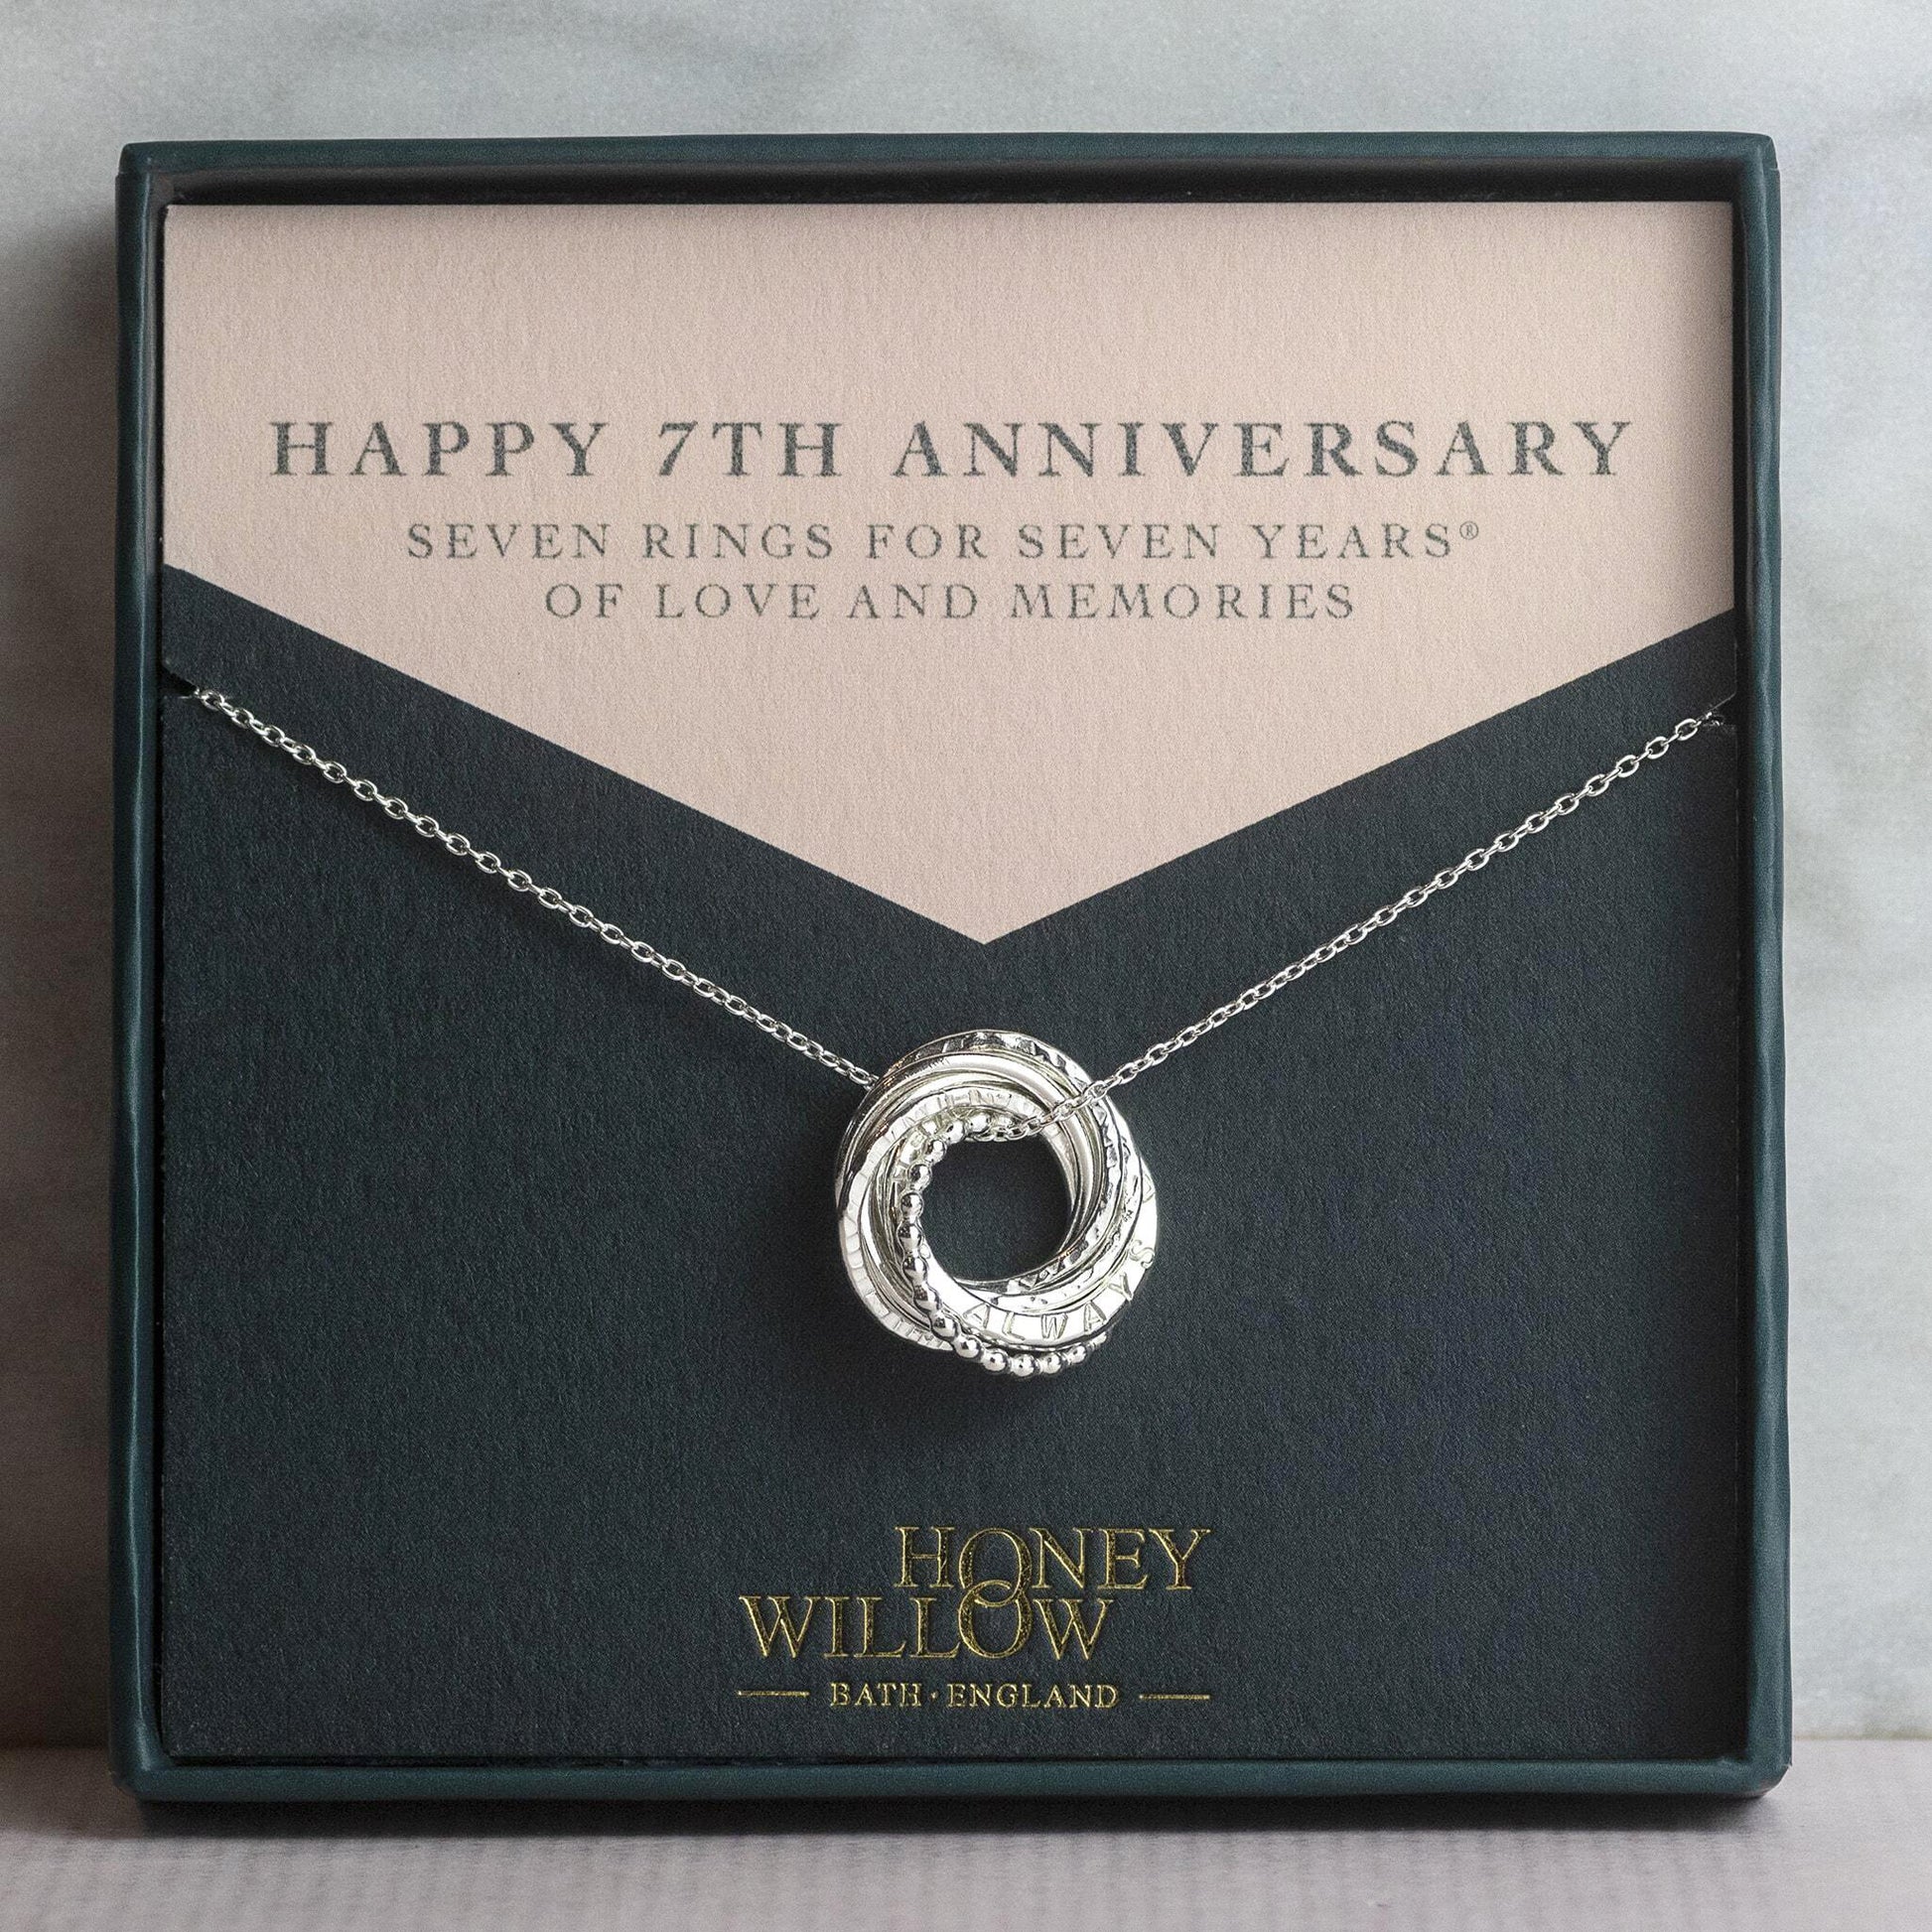 Personalised 7th Anniversary Necklace - Hand-Stamped - The Original 7 Rings for 7 Years Necklace - Petite Silver